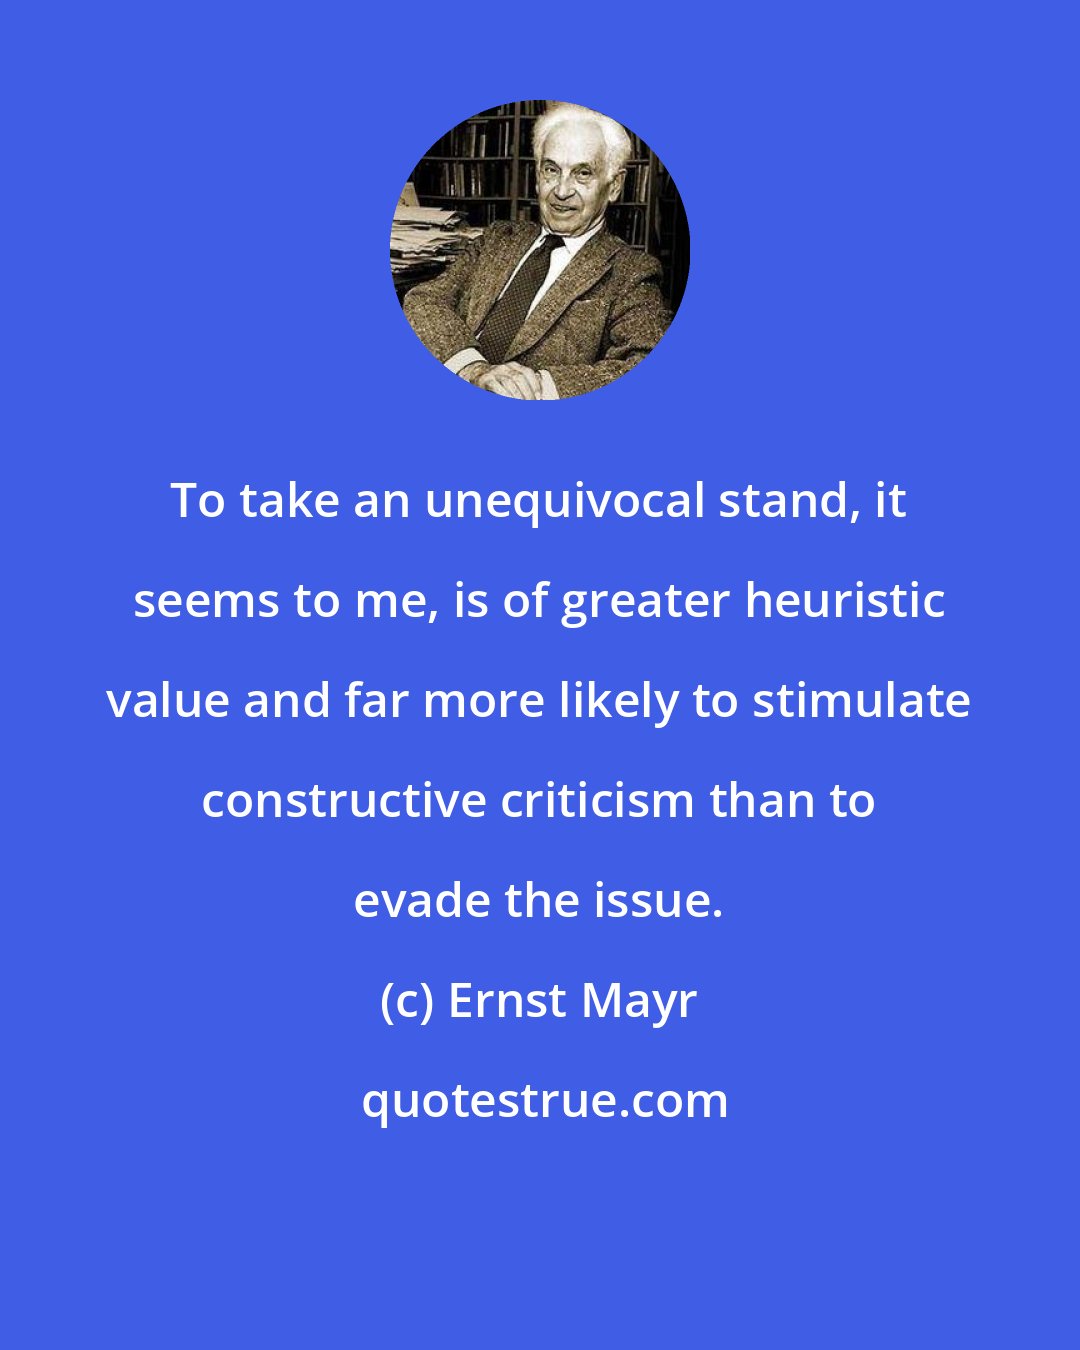 Ernst Mayr: To take an unequivocal stand, it seems to me, is of greater heuristic value and far more likely to stimulate constructive criticism than to evade the issue.